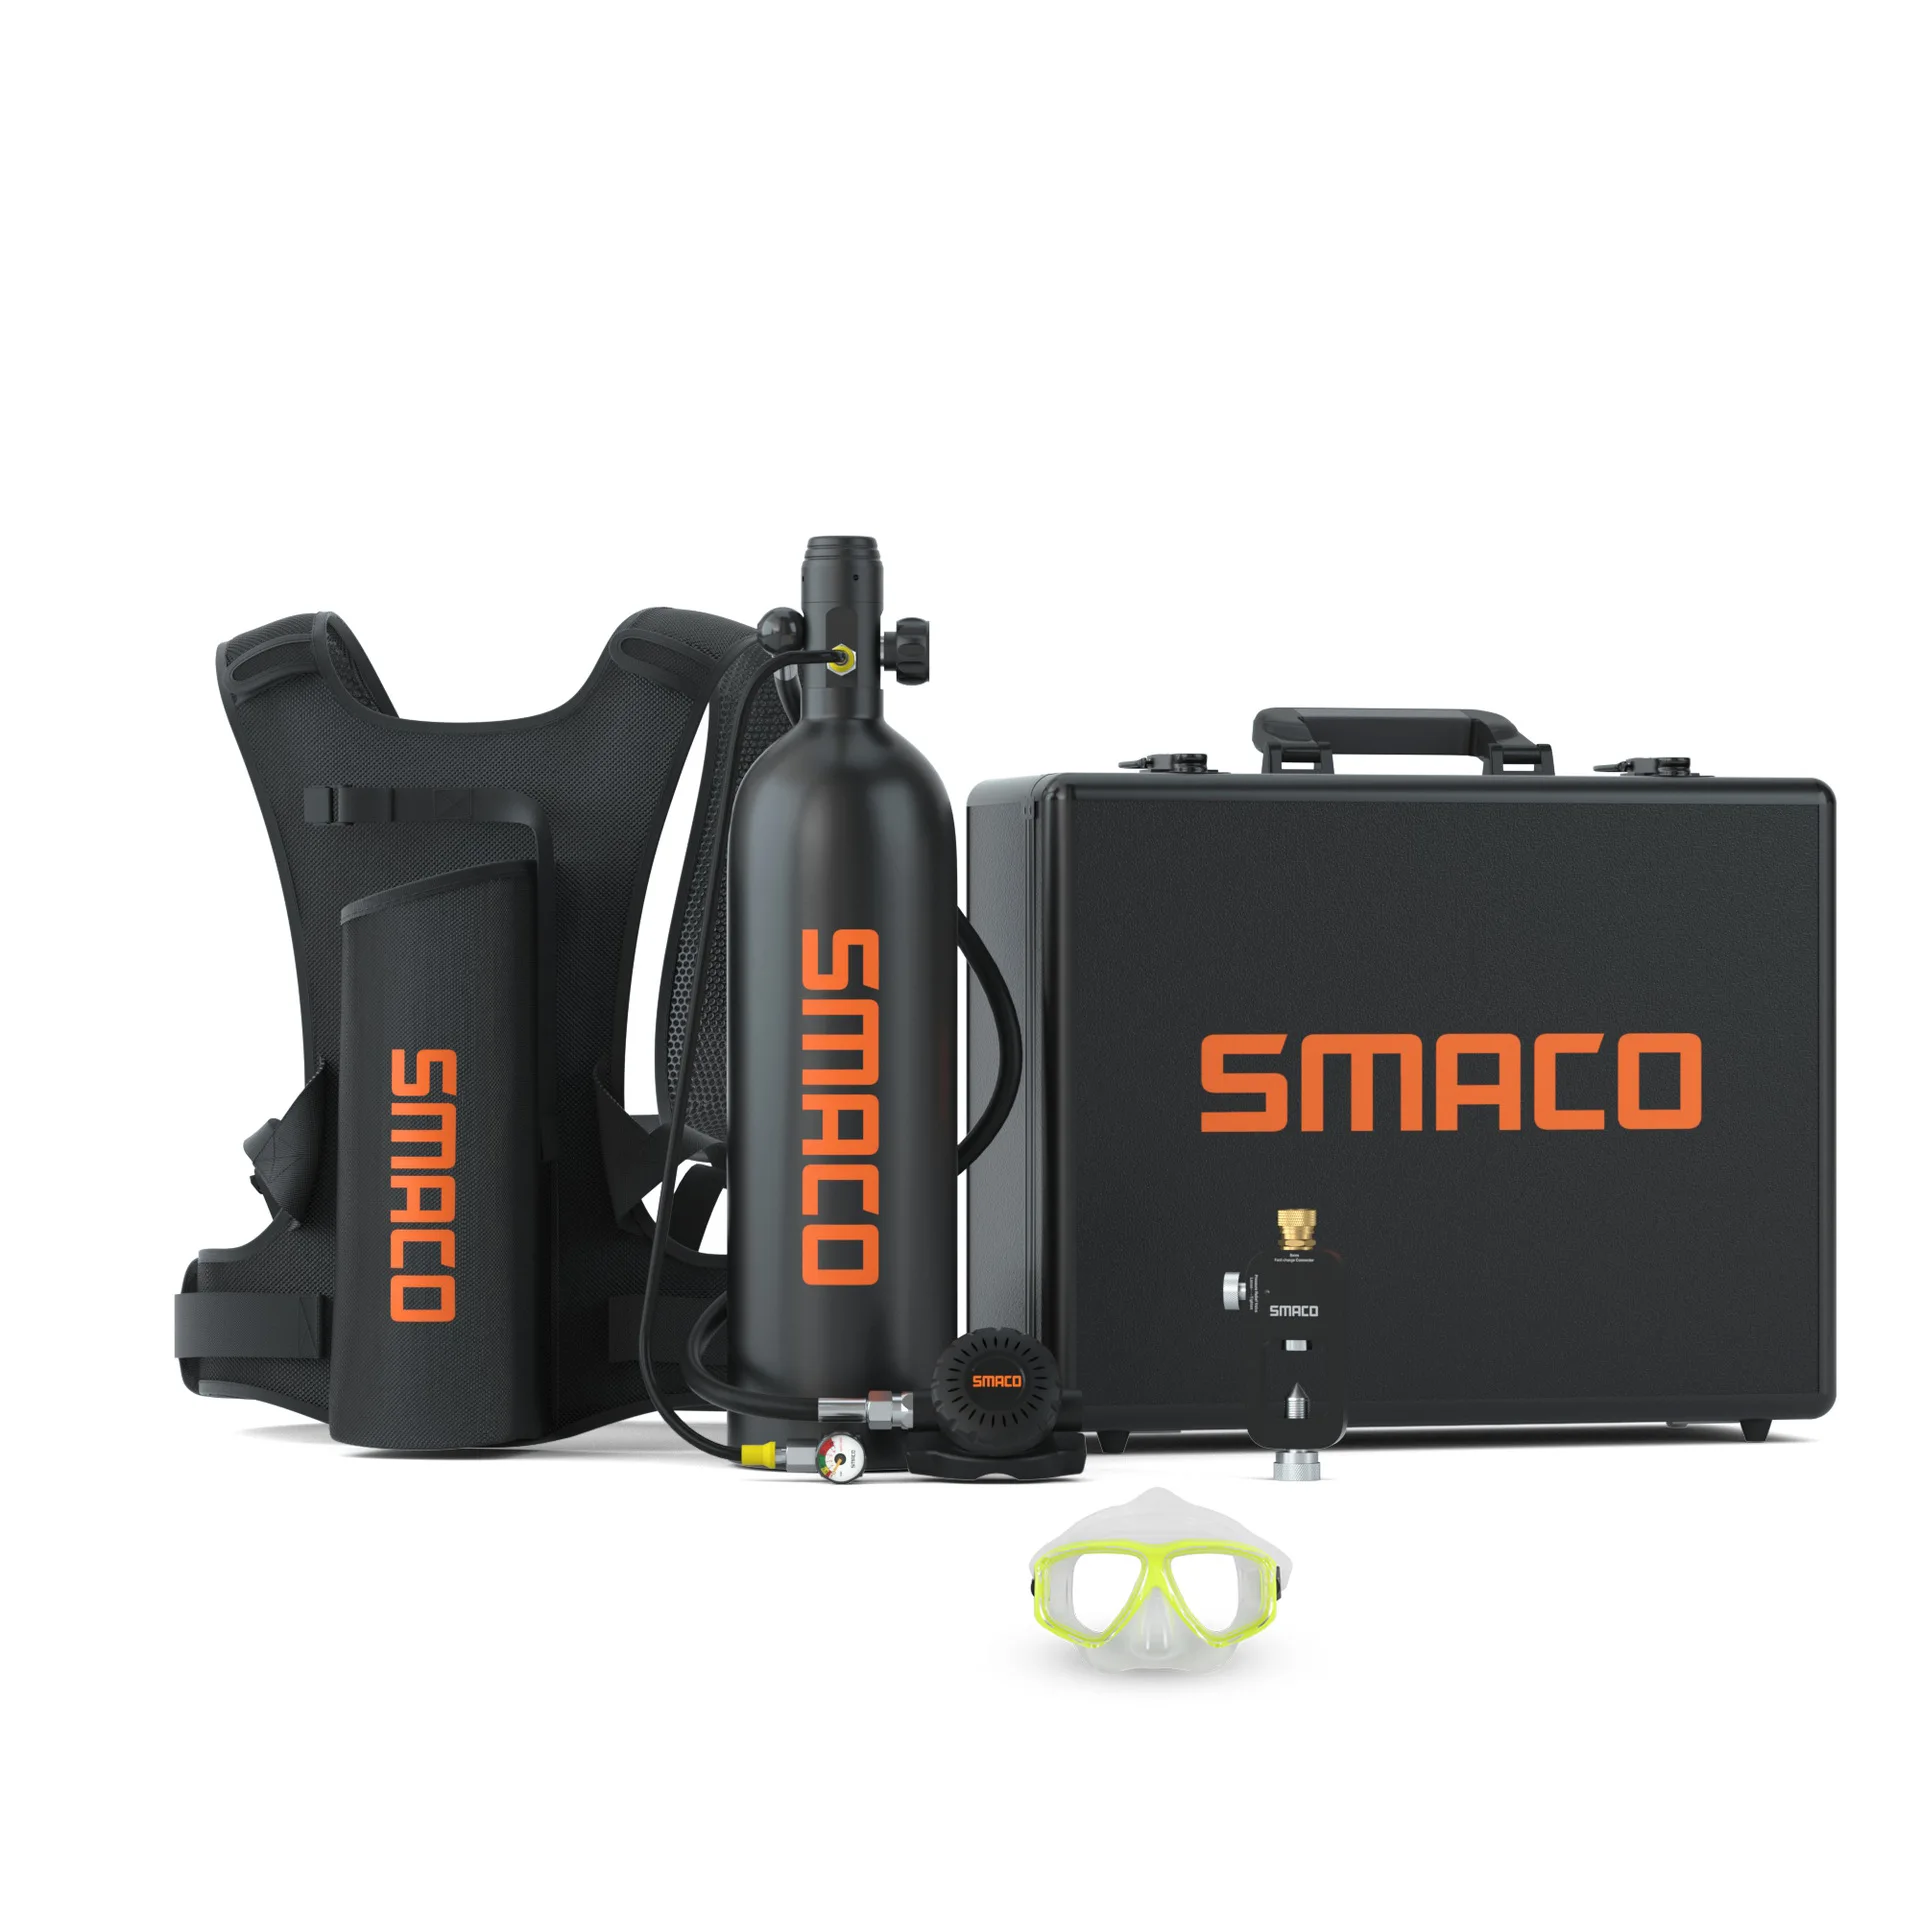 

SMACO 2L S700pro new set air oxygen tank up to 25minutes dive scuba system diving equipment kit